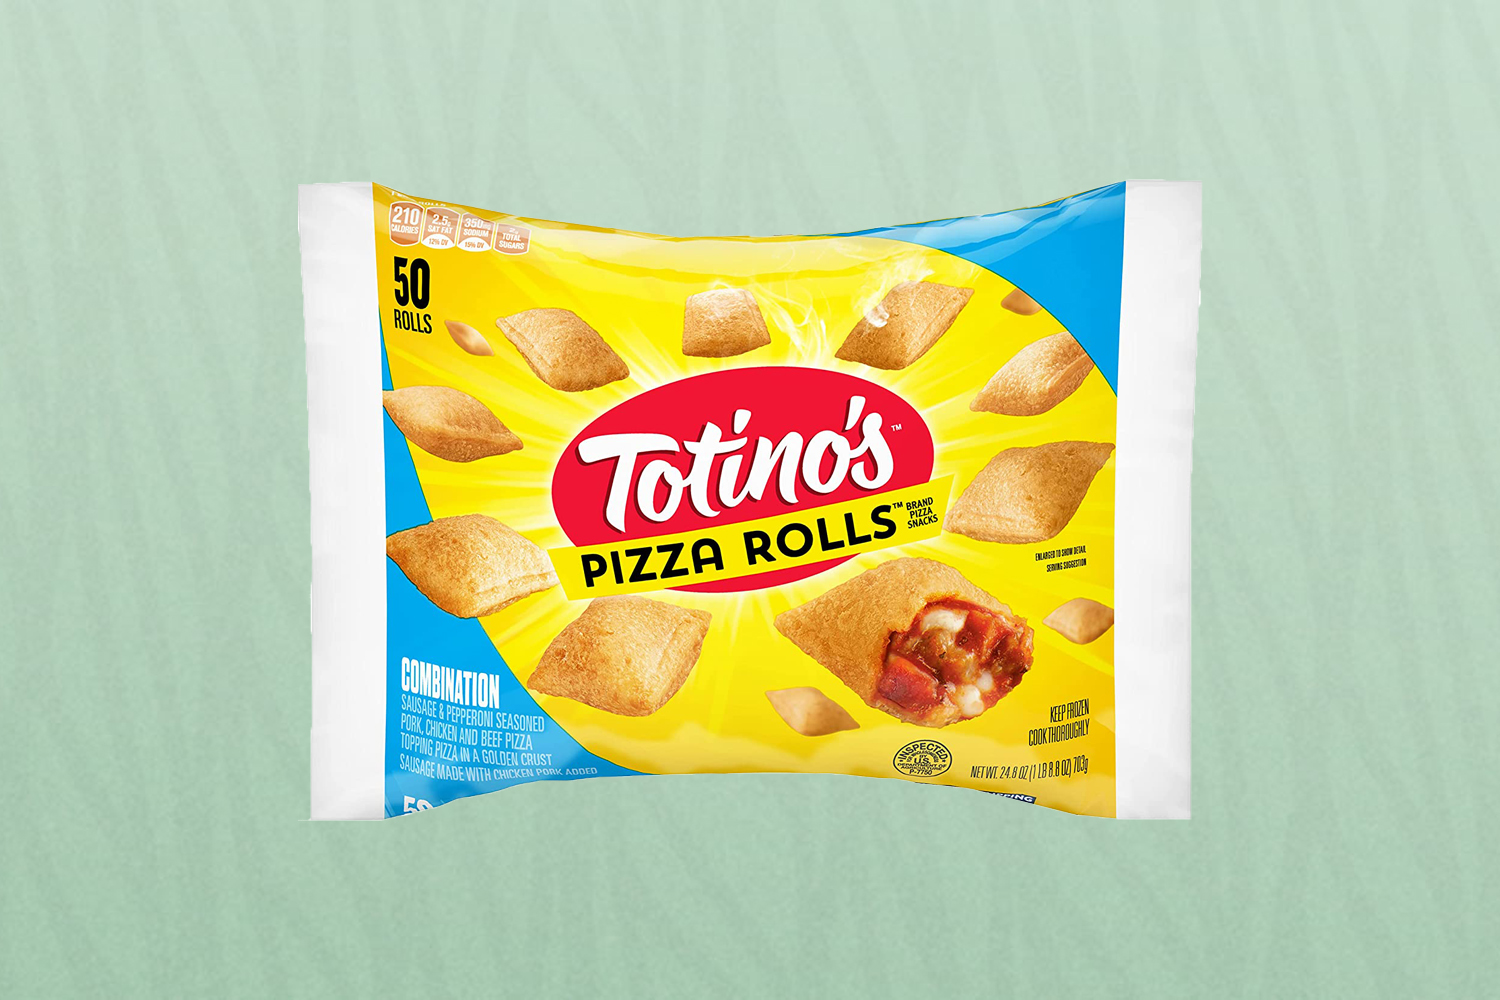 Totino's Pizza Rolls are one of the best snacks to eat when you're high in 2022 because they're filling, flavorful, and taste like pizza.